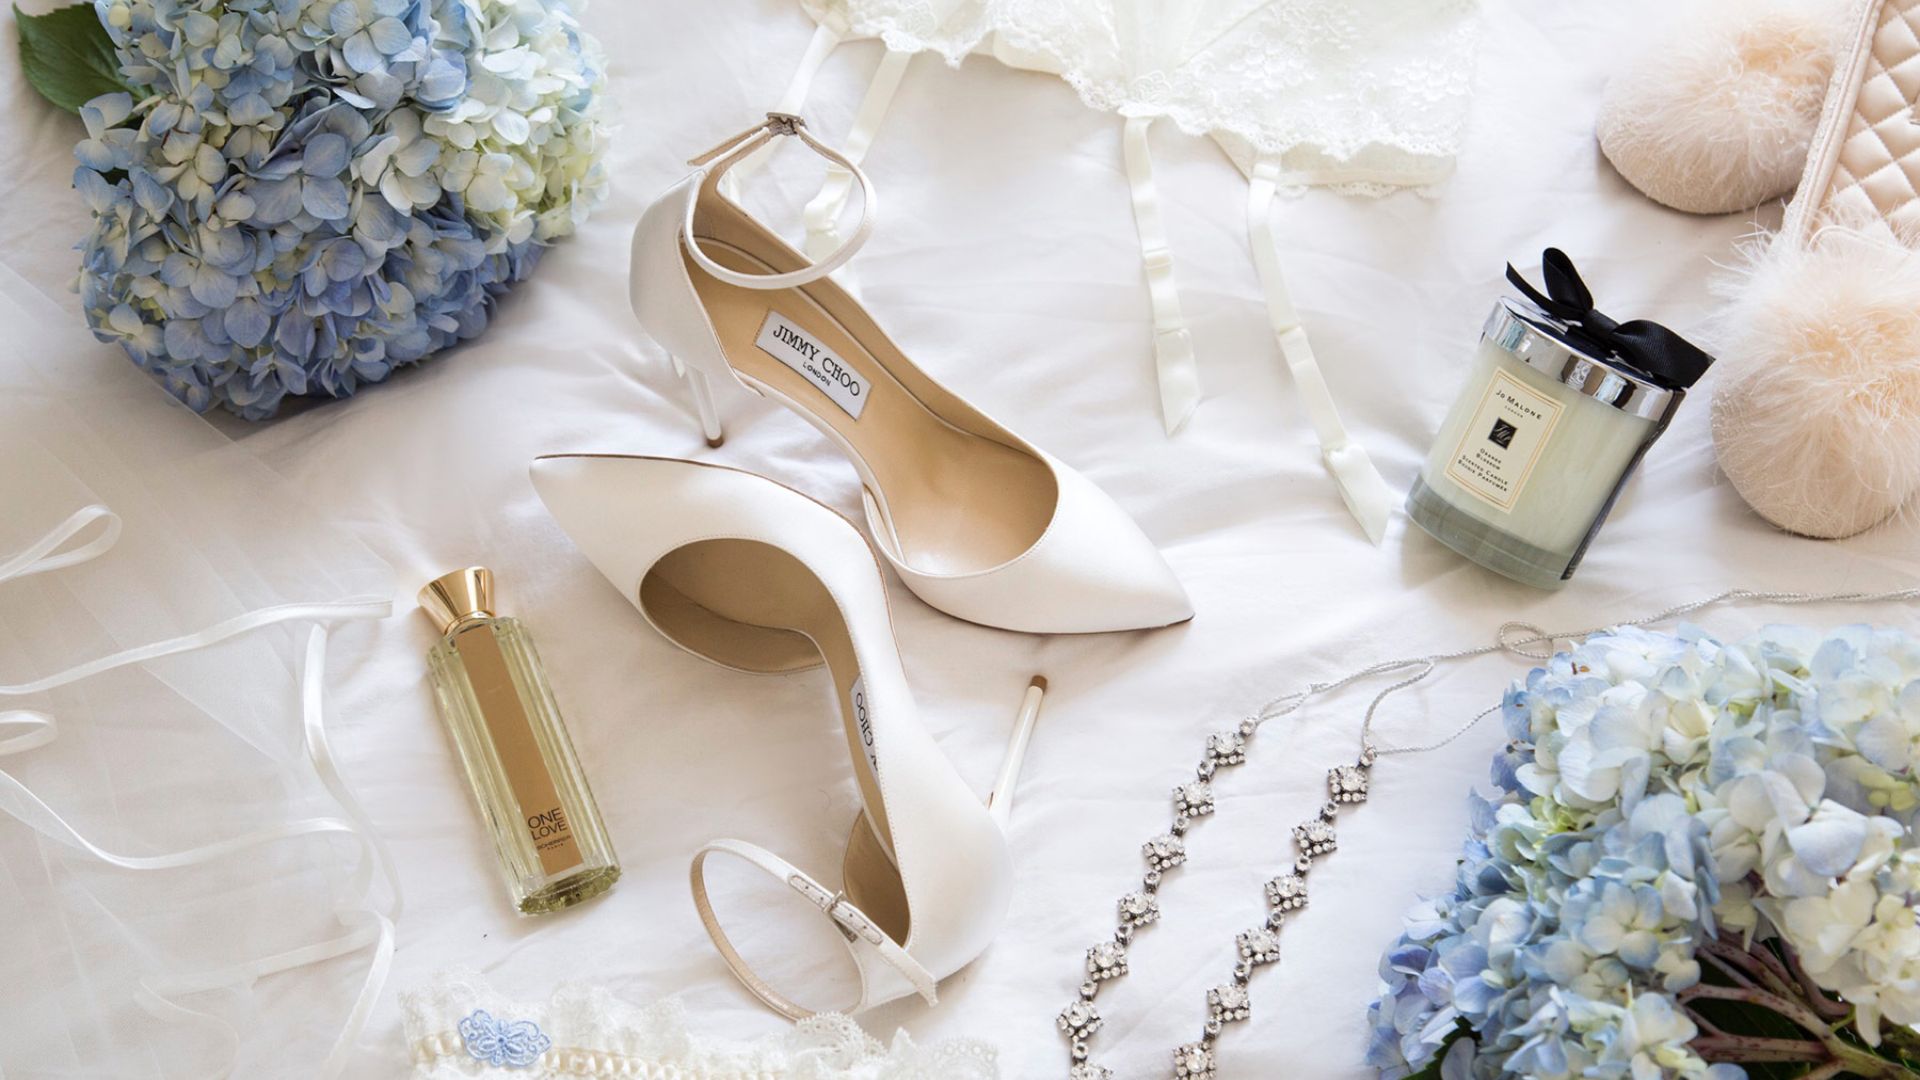 The Dress and Bridal Accessories